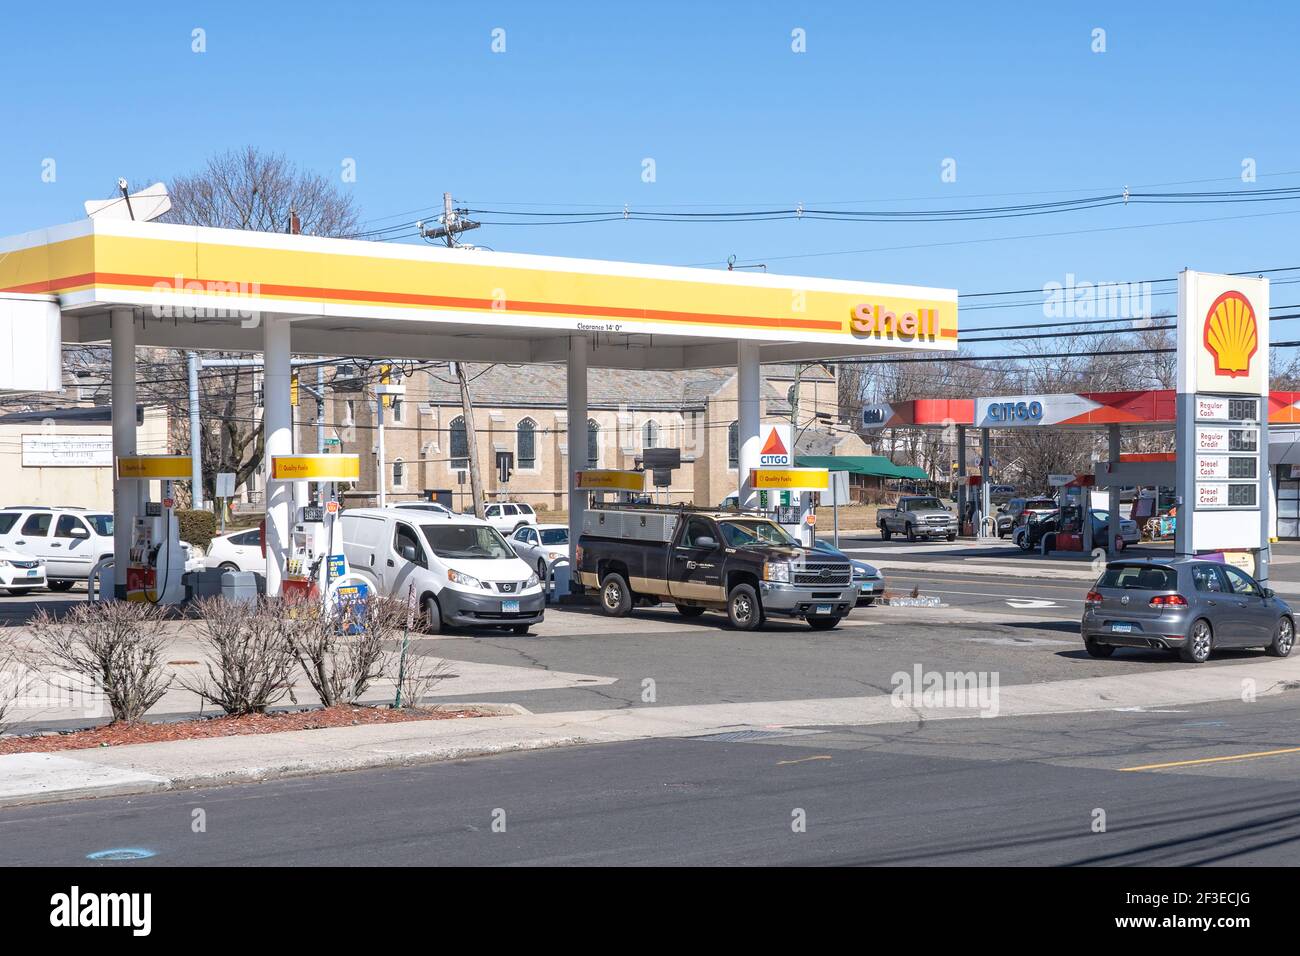 A view of Shell and Citgo gas stations in Norwalk, Connecticut.Oil and gasoline prices were rebounding after last year's collapse in fuel demand and prices. According to the AAA motor club gas prices have risen about 35 cents a gallon on average over the last month and could reach $4 a gallon in some states by summer. Stock Photo